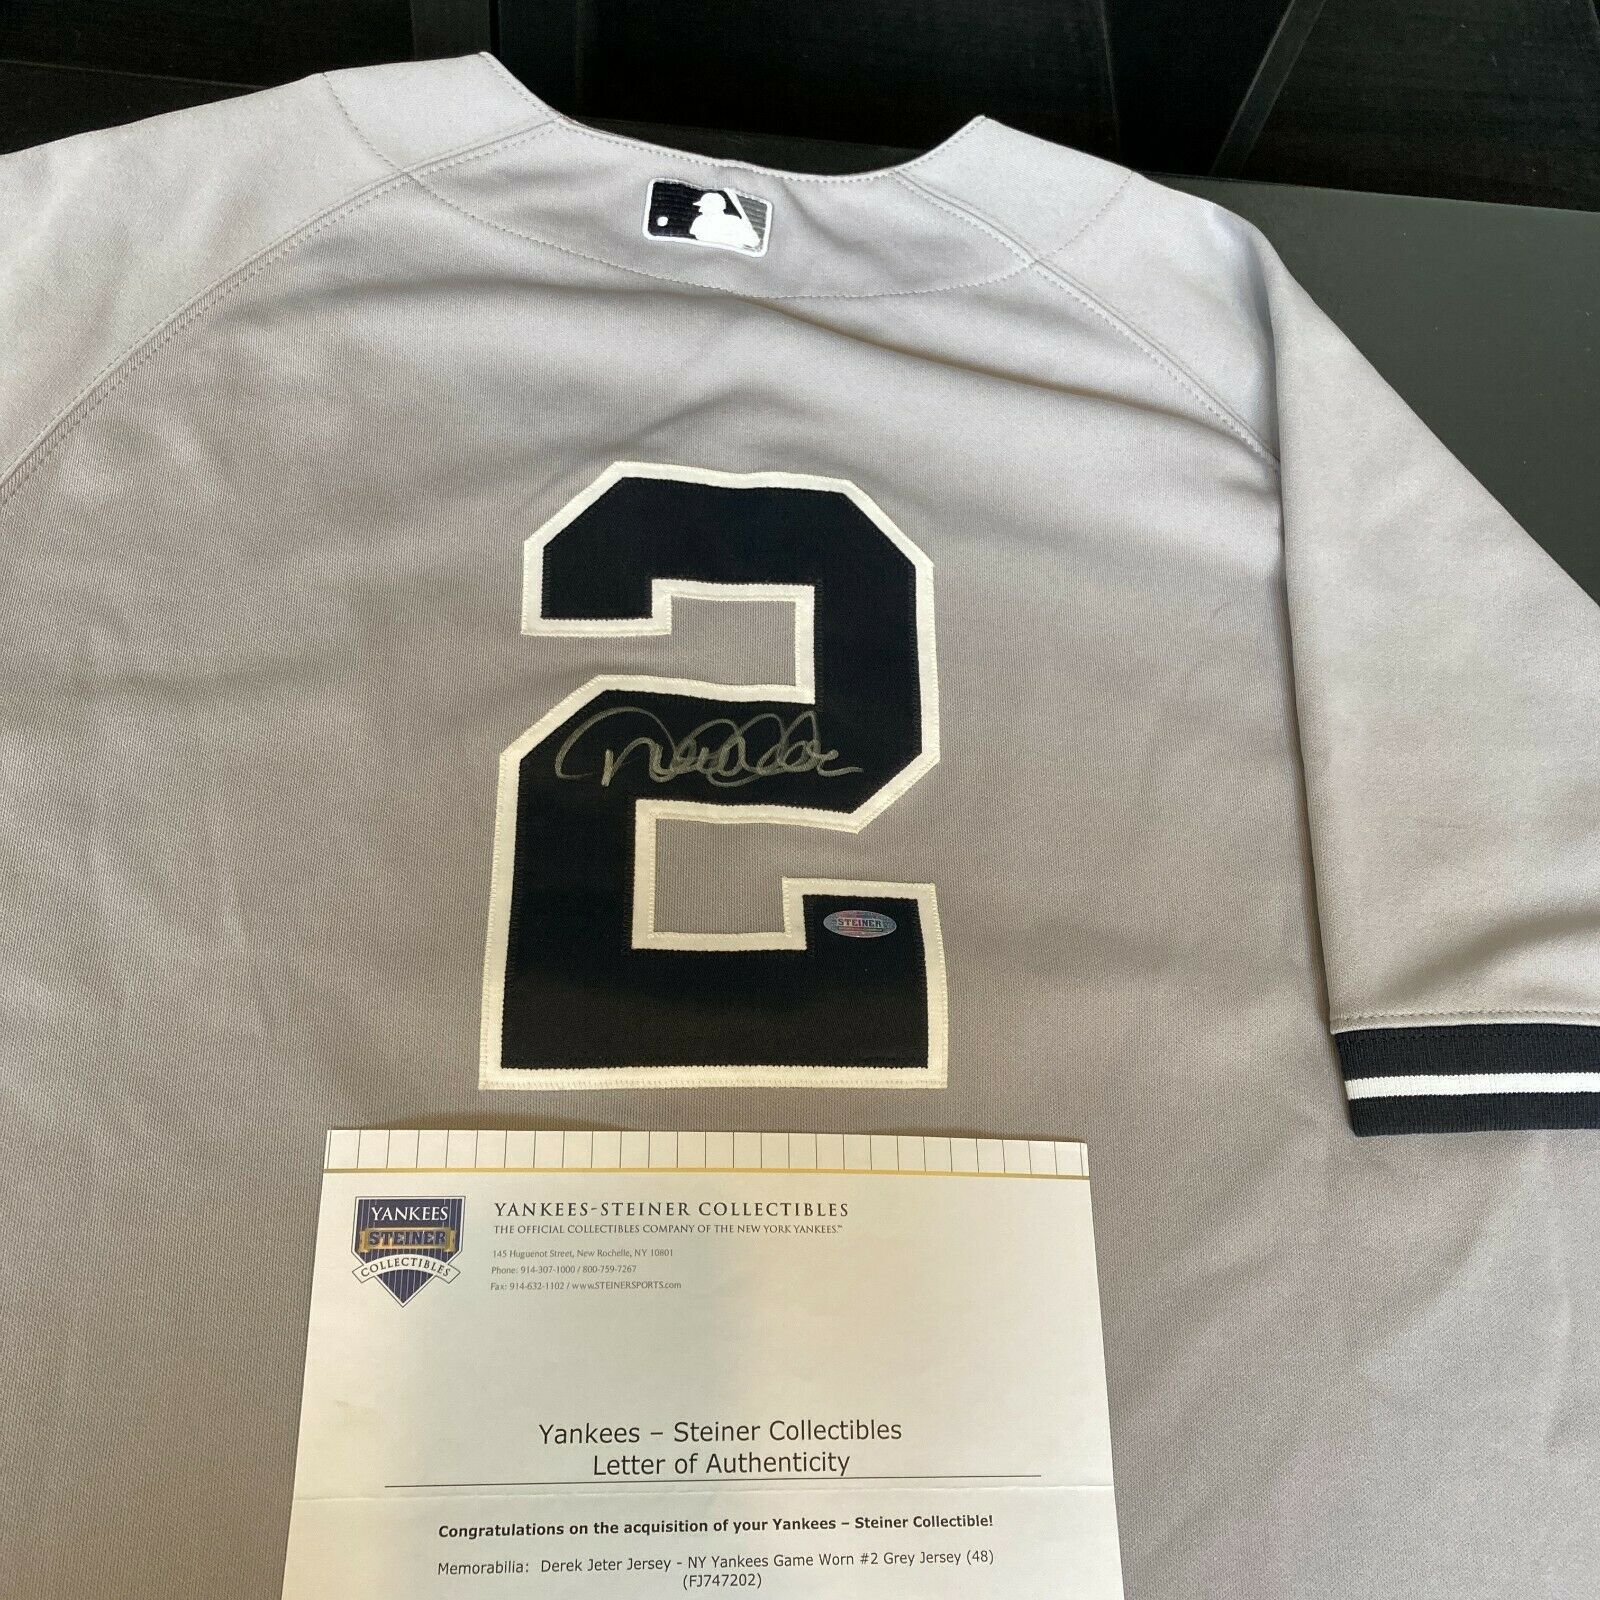 Derek Jeter Signed 2011 Game Used Jersey Photo Matched Jersey